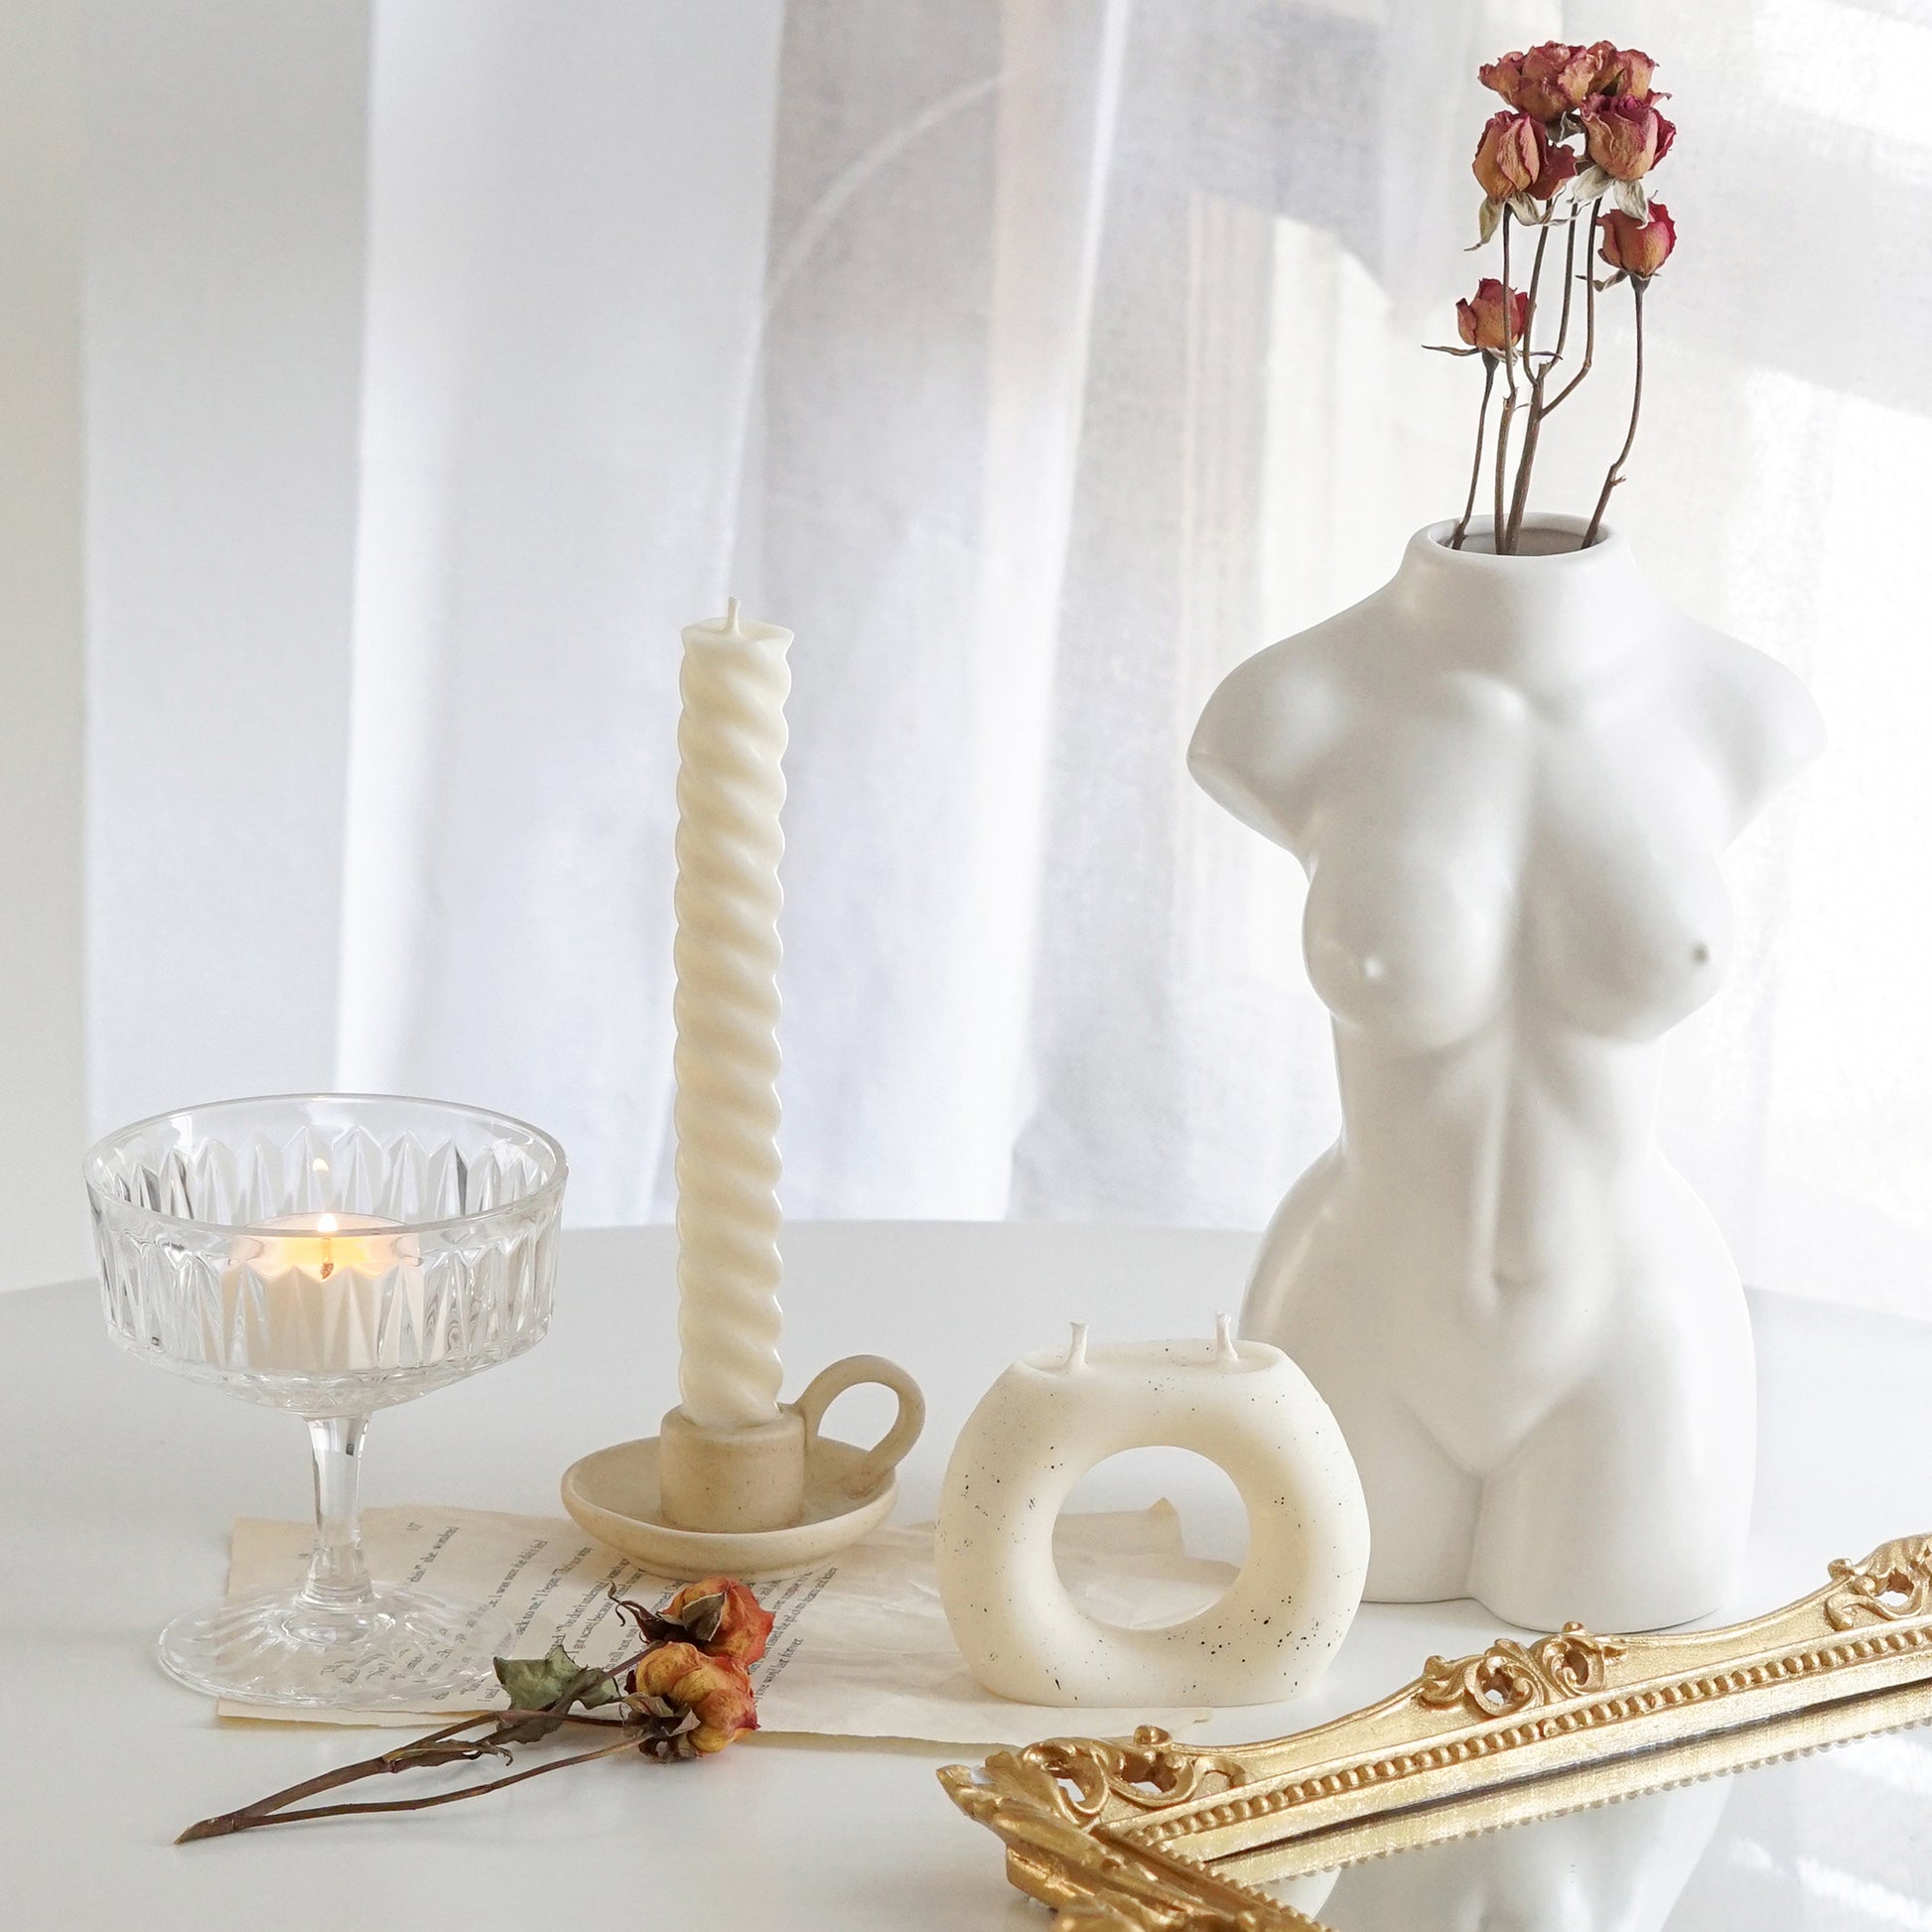 white twisted swirl taper candle in a ceramic candle holder, orange rose dried flowers, ring donut shape dotted white soy pillar candle, a lit tealight candle in a coupe glass placed on book pages, rectangular gold french mirror tray, and a feminine body shape white ceramic flower vase on white round table